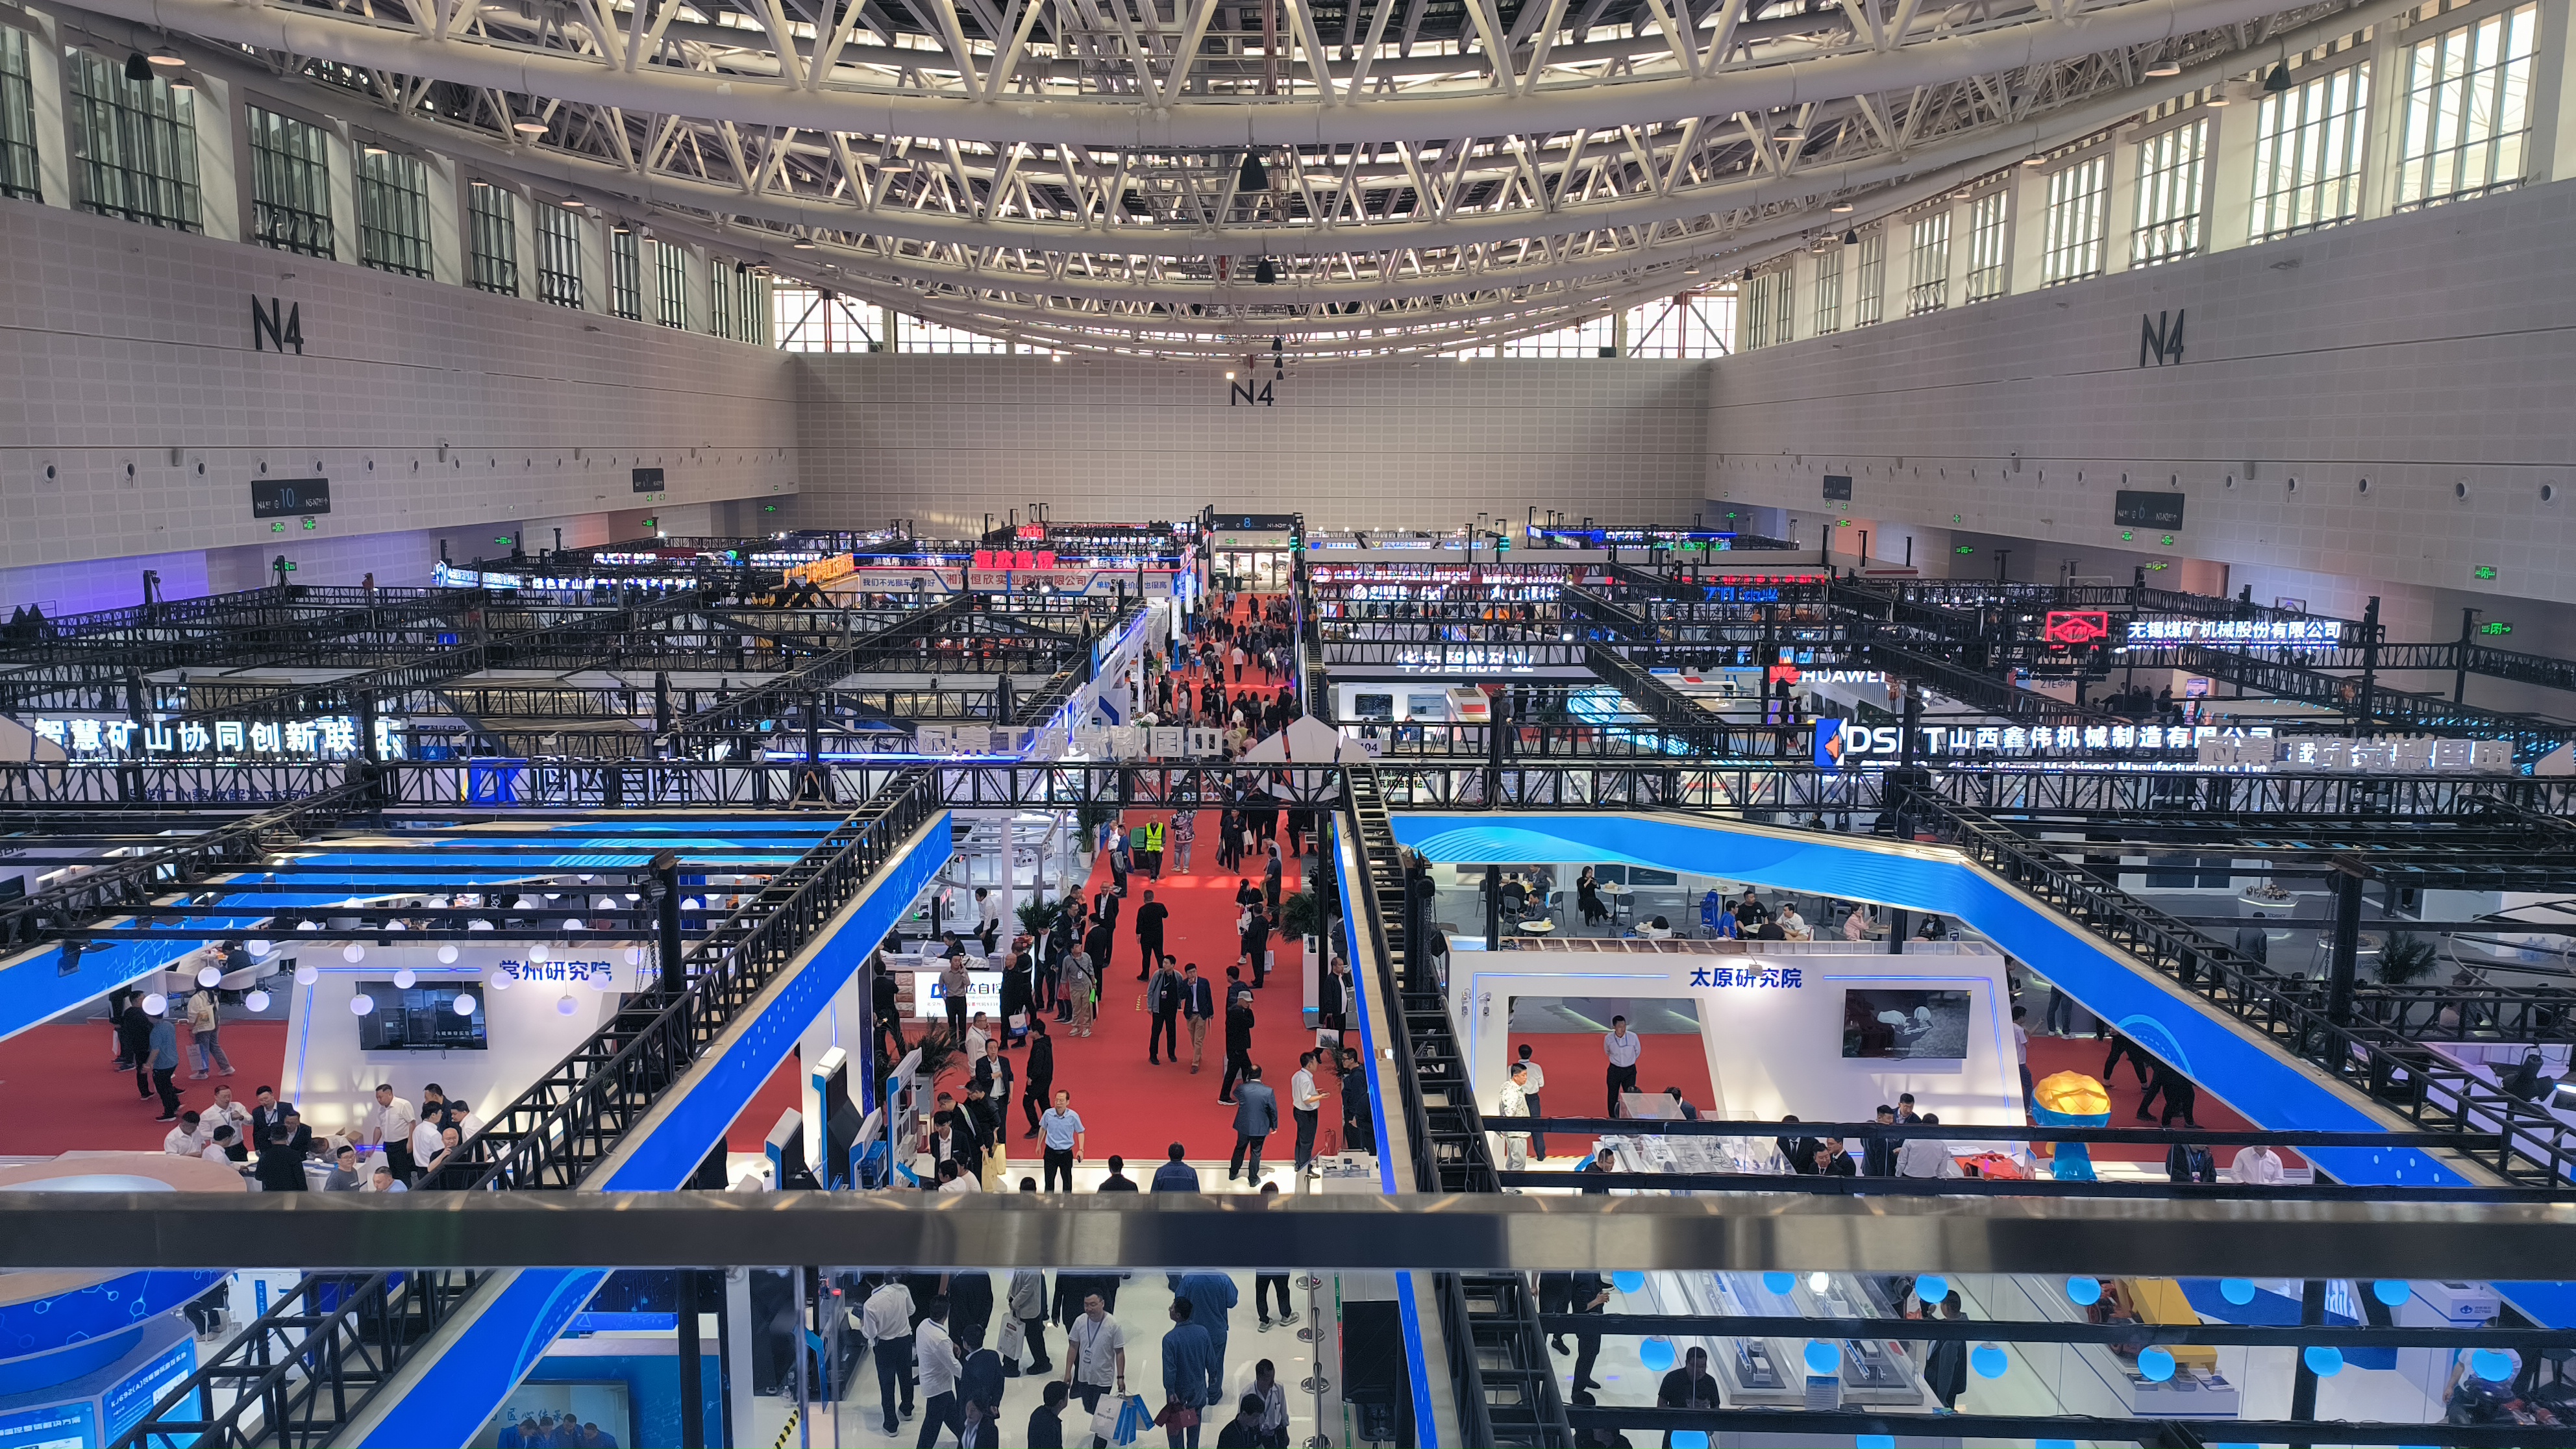 22nd Taiyuan Coal (Energy) Industry Technology and Equipment Exhibition was held in Shanxi Xiaohe International Convention and Exhibition Center on April 22-24.